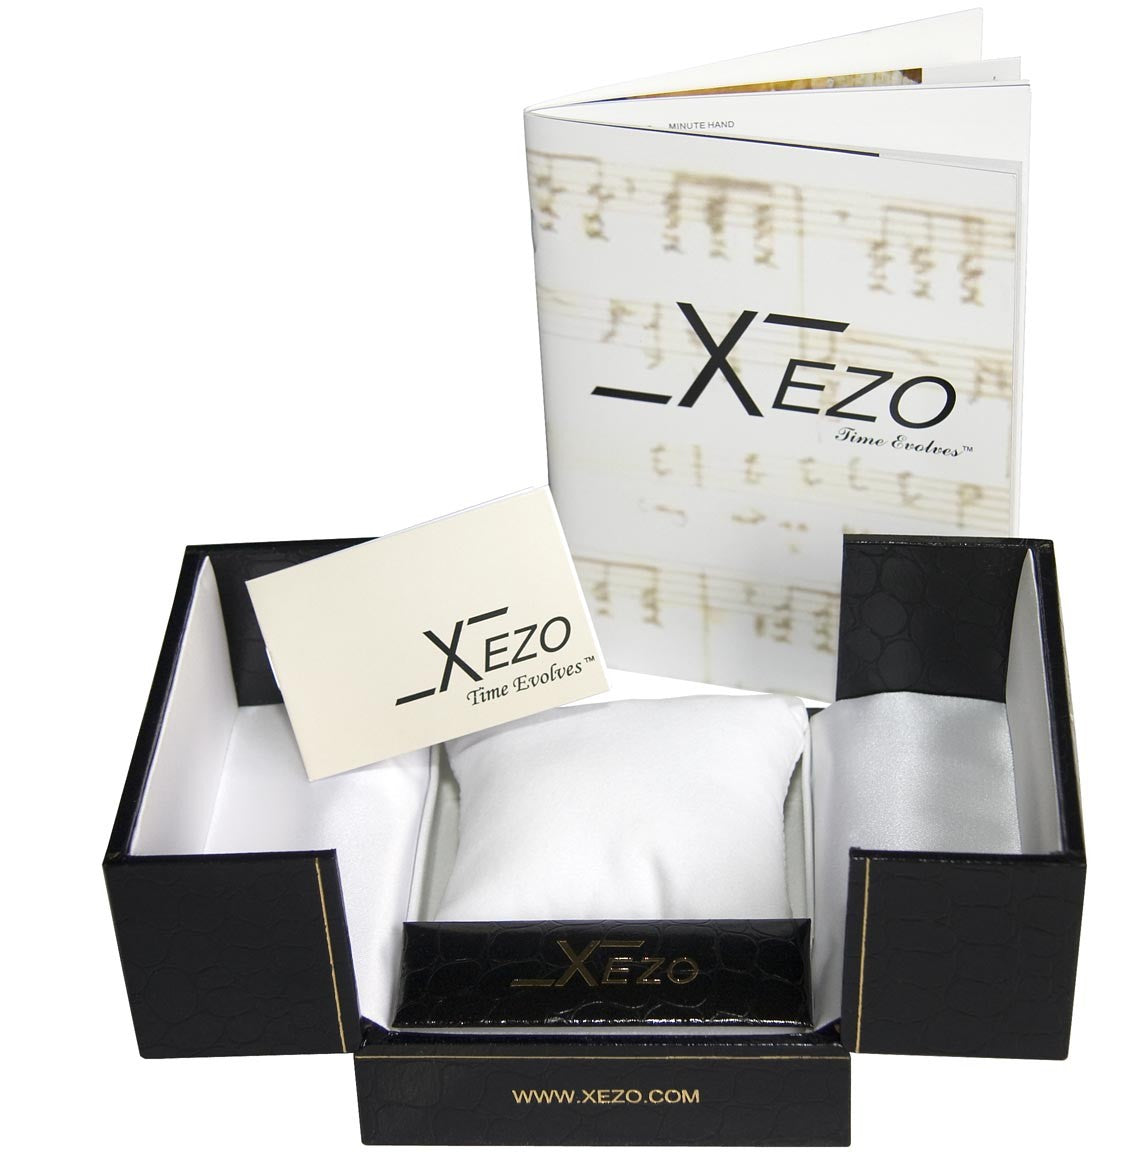 Xezo - Black gift box, certificate, and manual of the Air Commando D45-BM watch